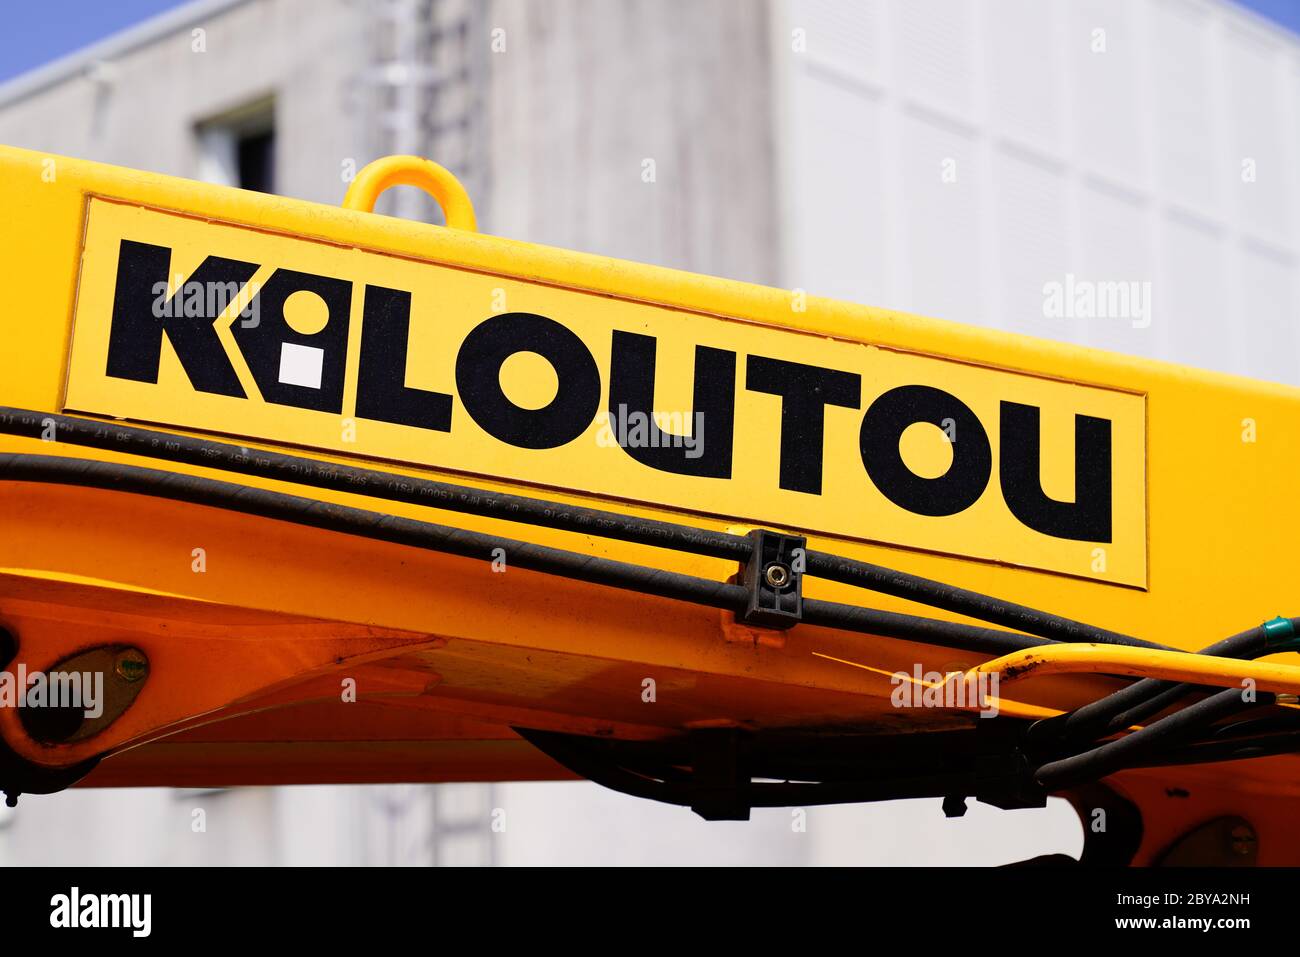 Bordeaux , Aquitaine / France - 06 06 2020 : kiloutou logo sign stickers on rental utility vehicle in construction site industrial Stock Photo